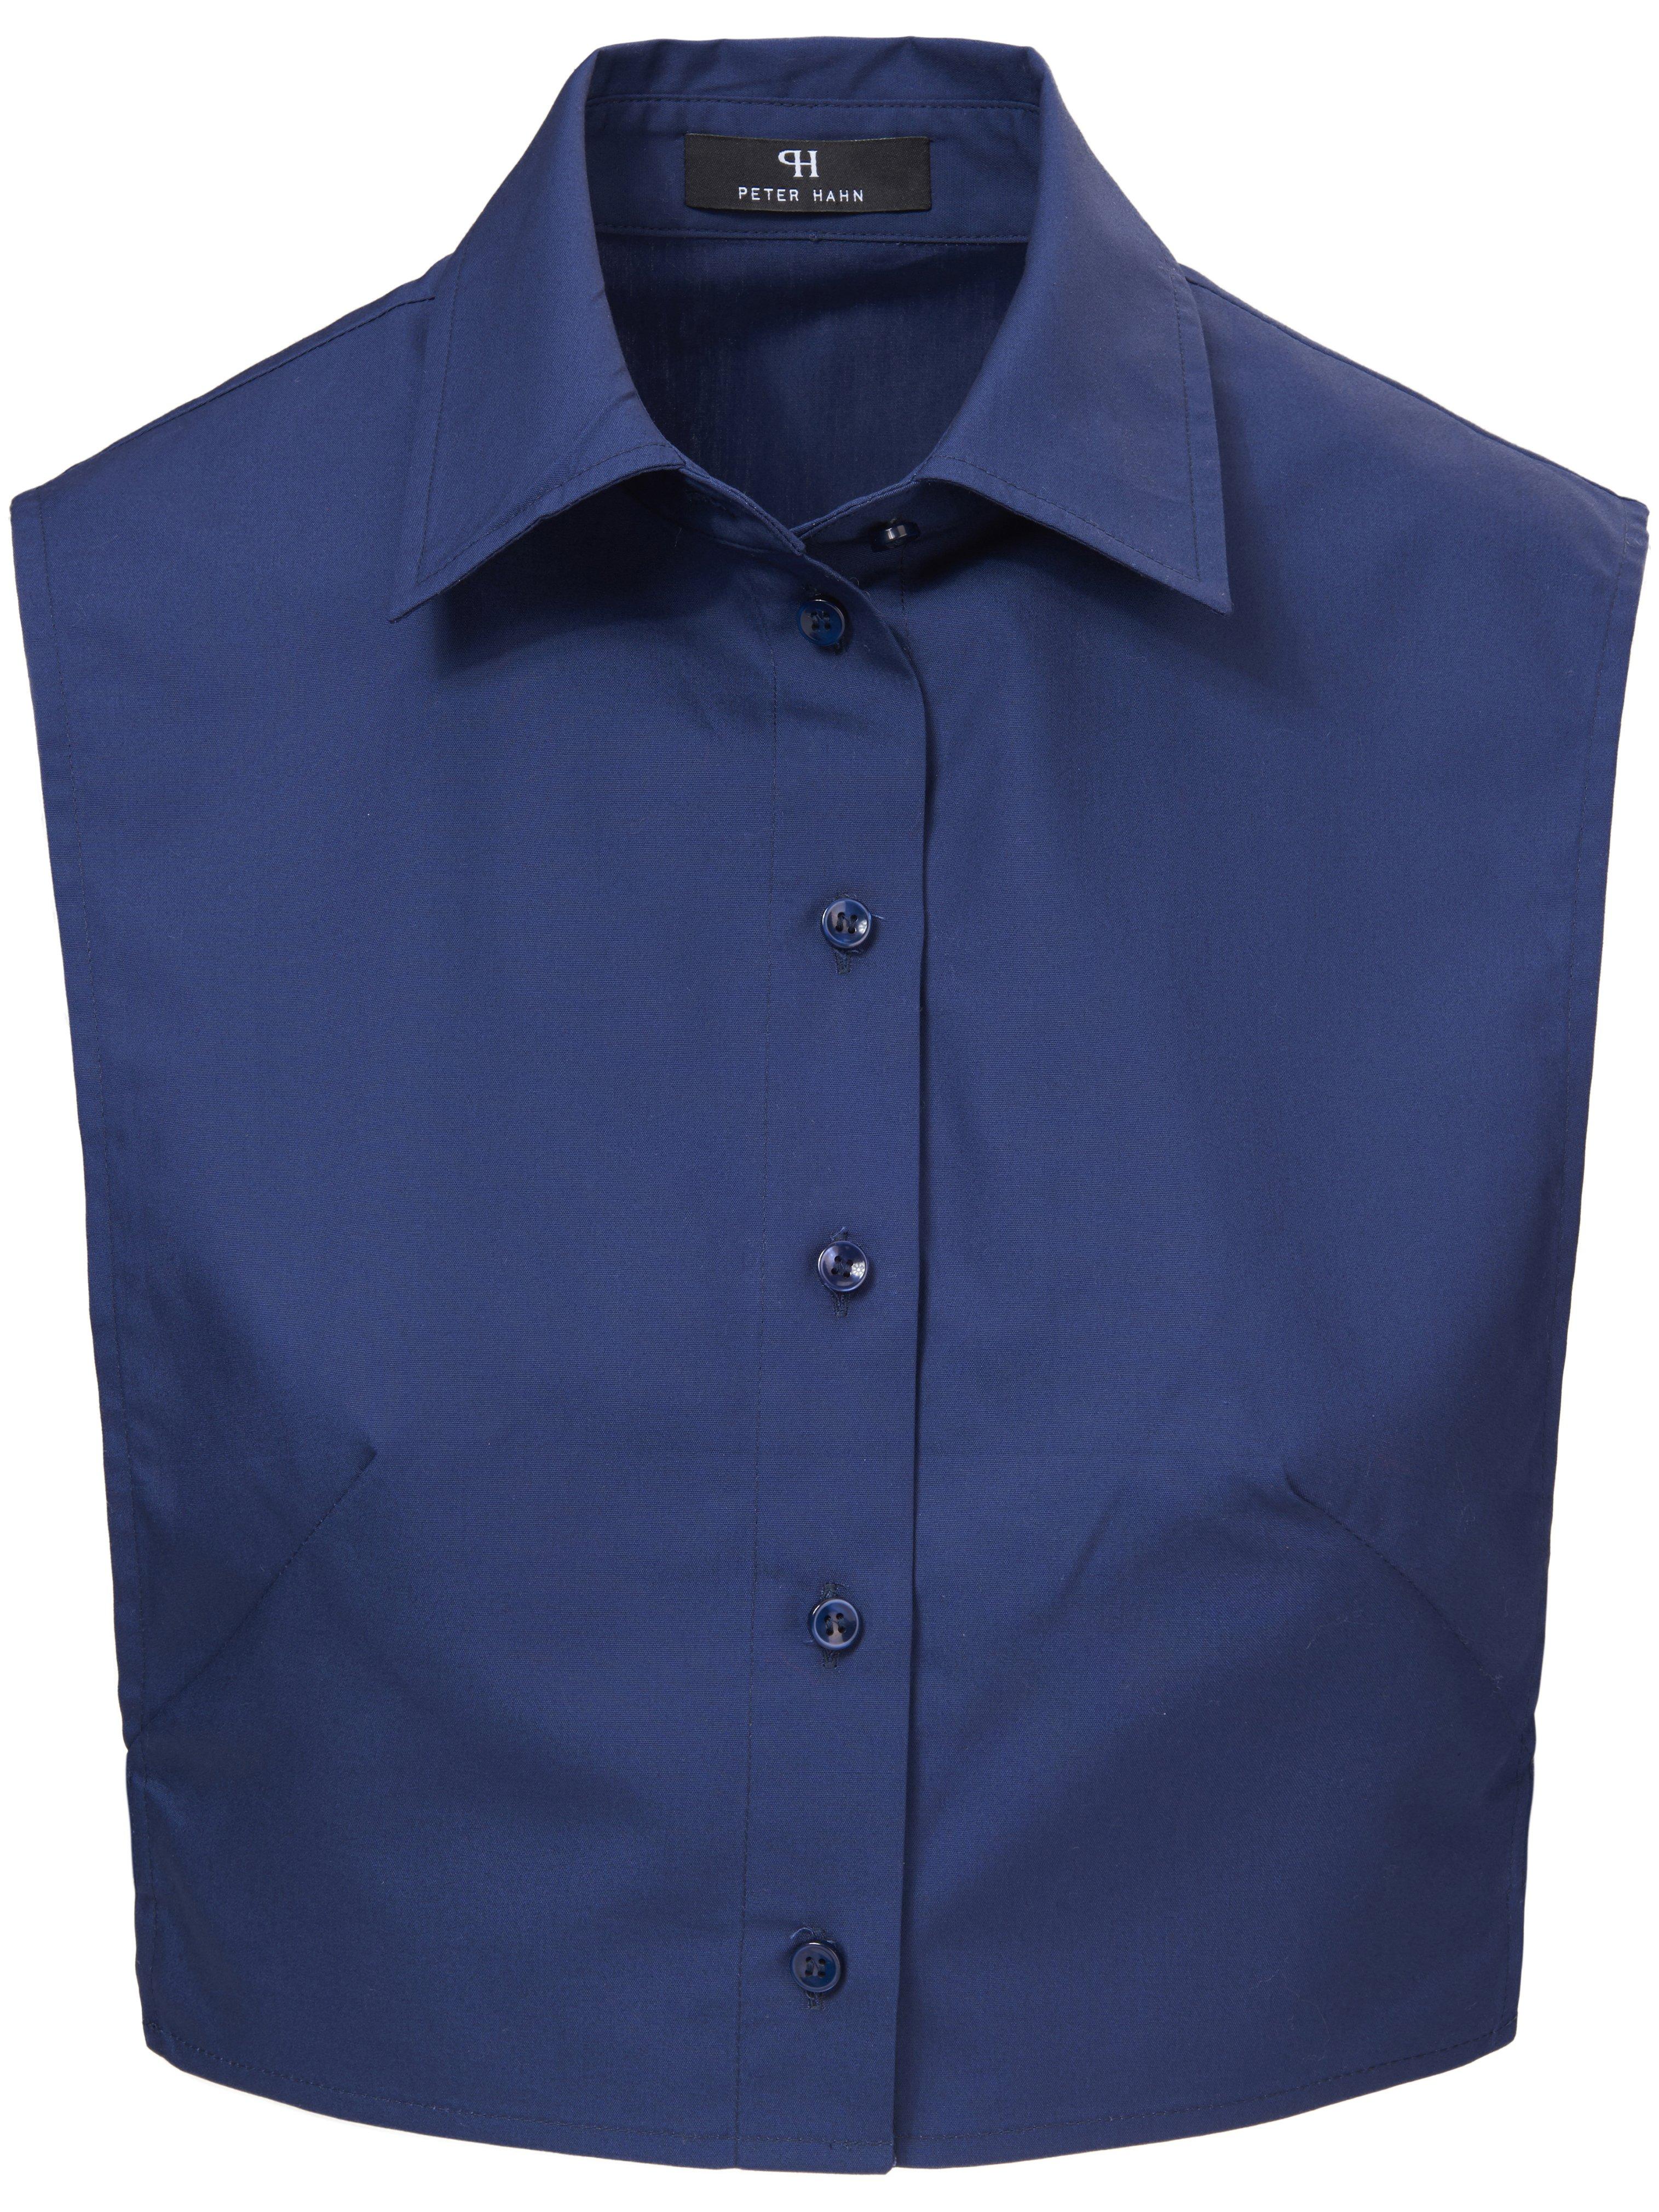 Image of Blouse collar Peter Hahn blue